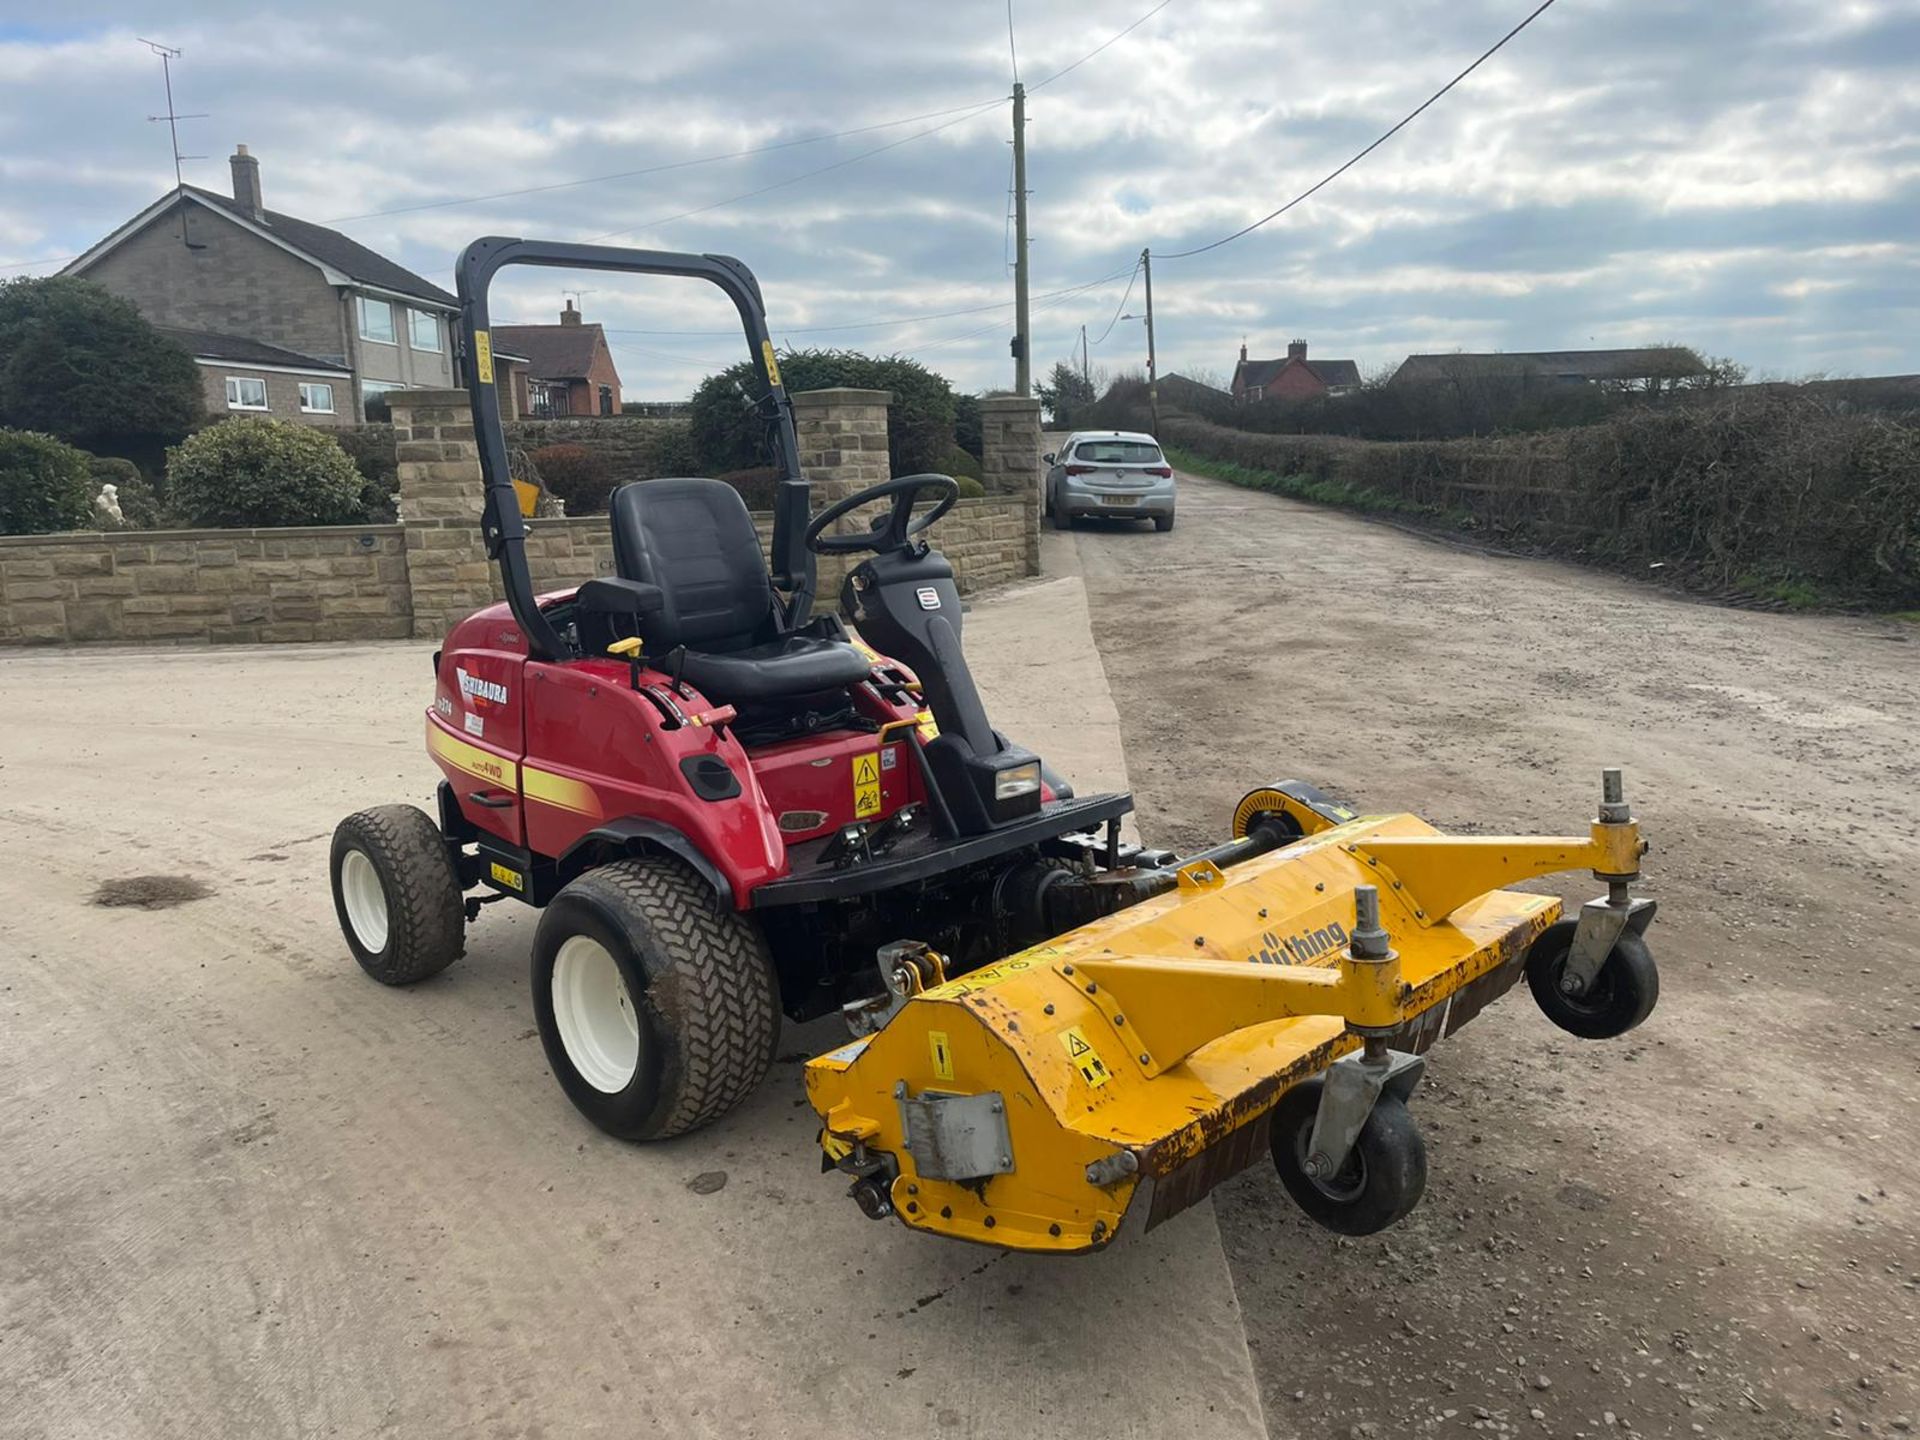 2014 SHIBAURA CM374 OUTFRONT MOWER, RUNS, DRIVES, CUTS, IN GOOD CONDITION, LOW 1450 HOURS *PLUS VAT* - Image 3 of 10